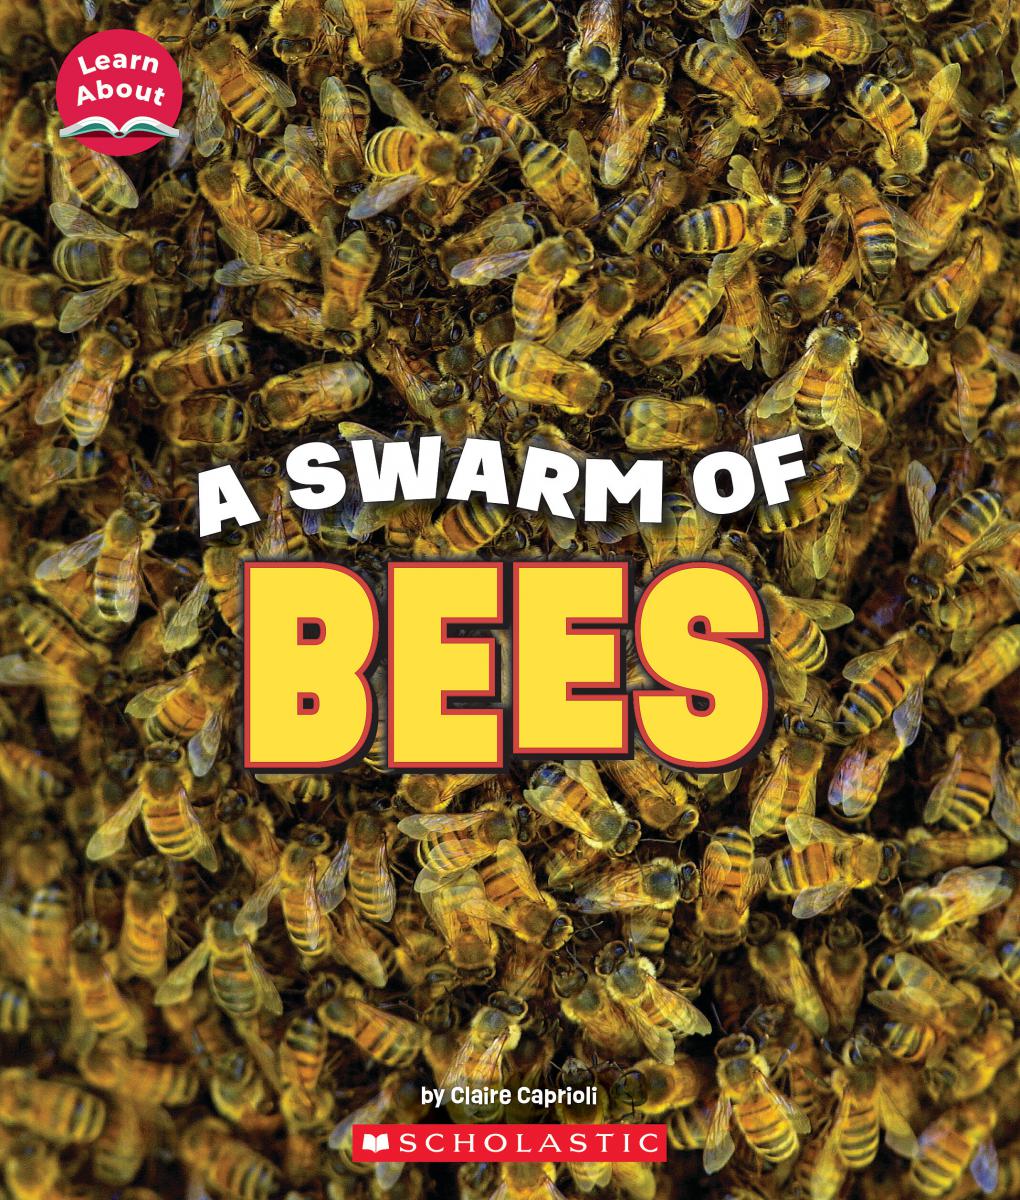 A Swarm of Bees (Learn About: Animals) | Caprioli, Claire